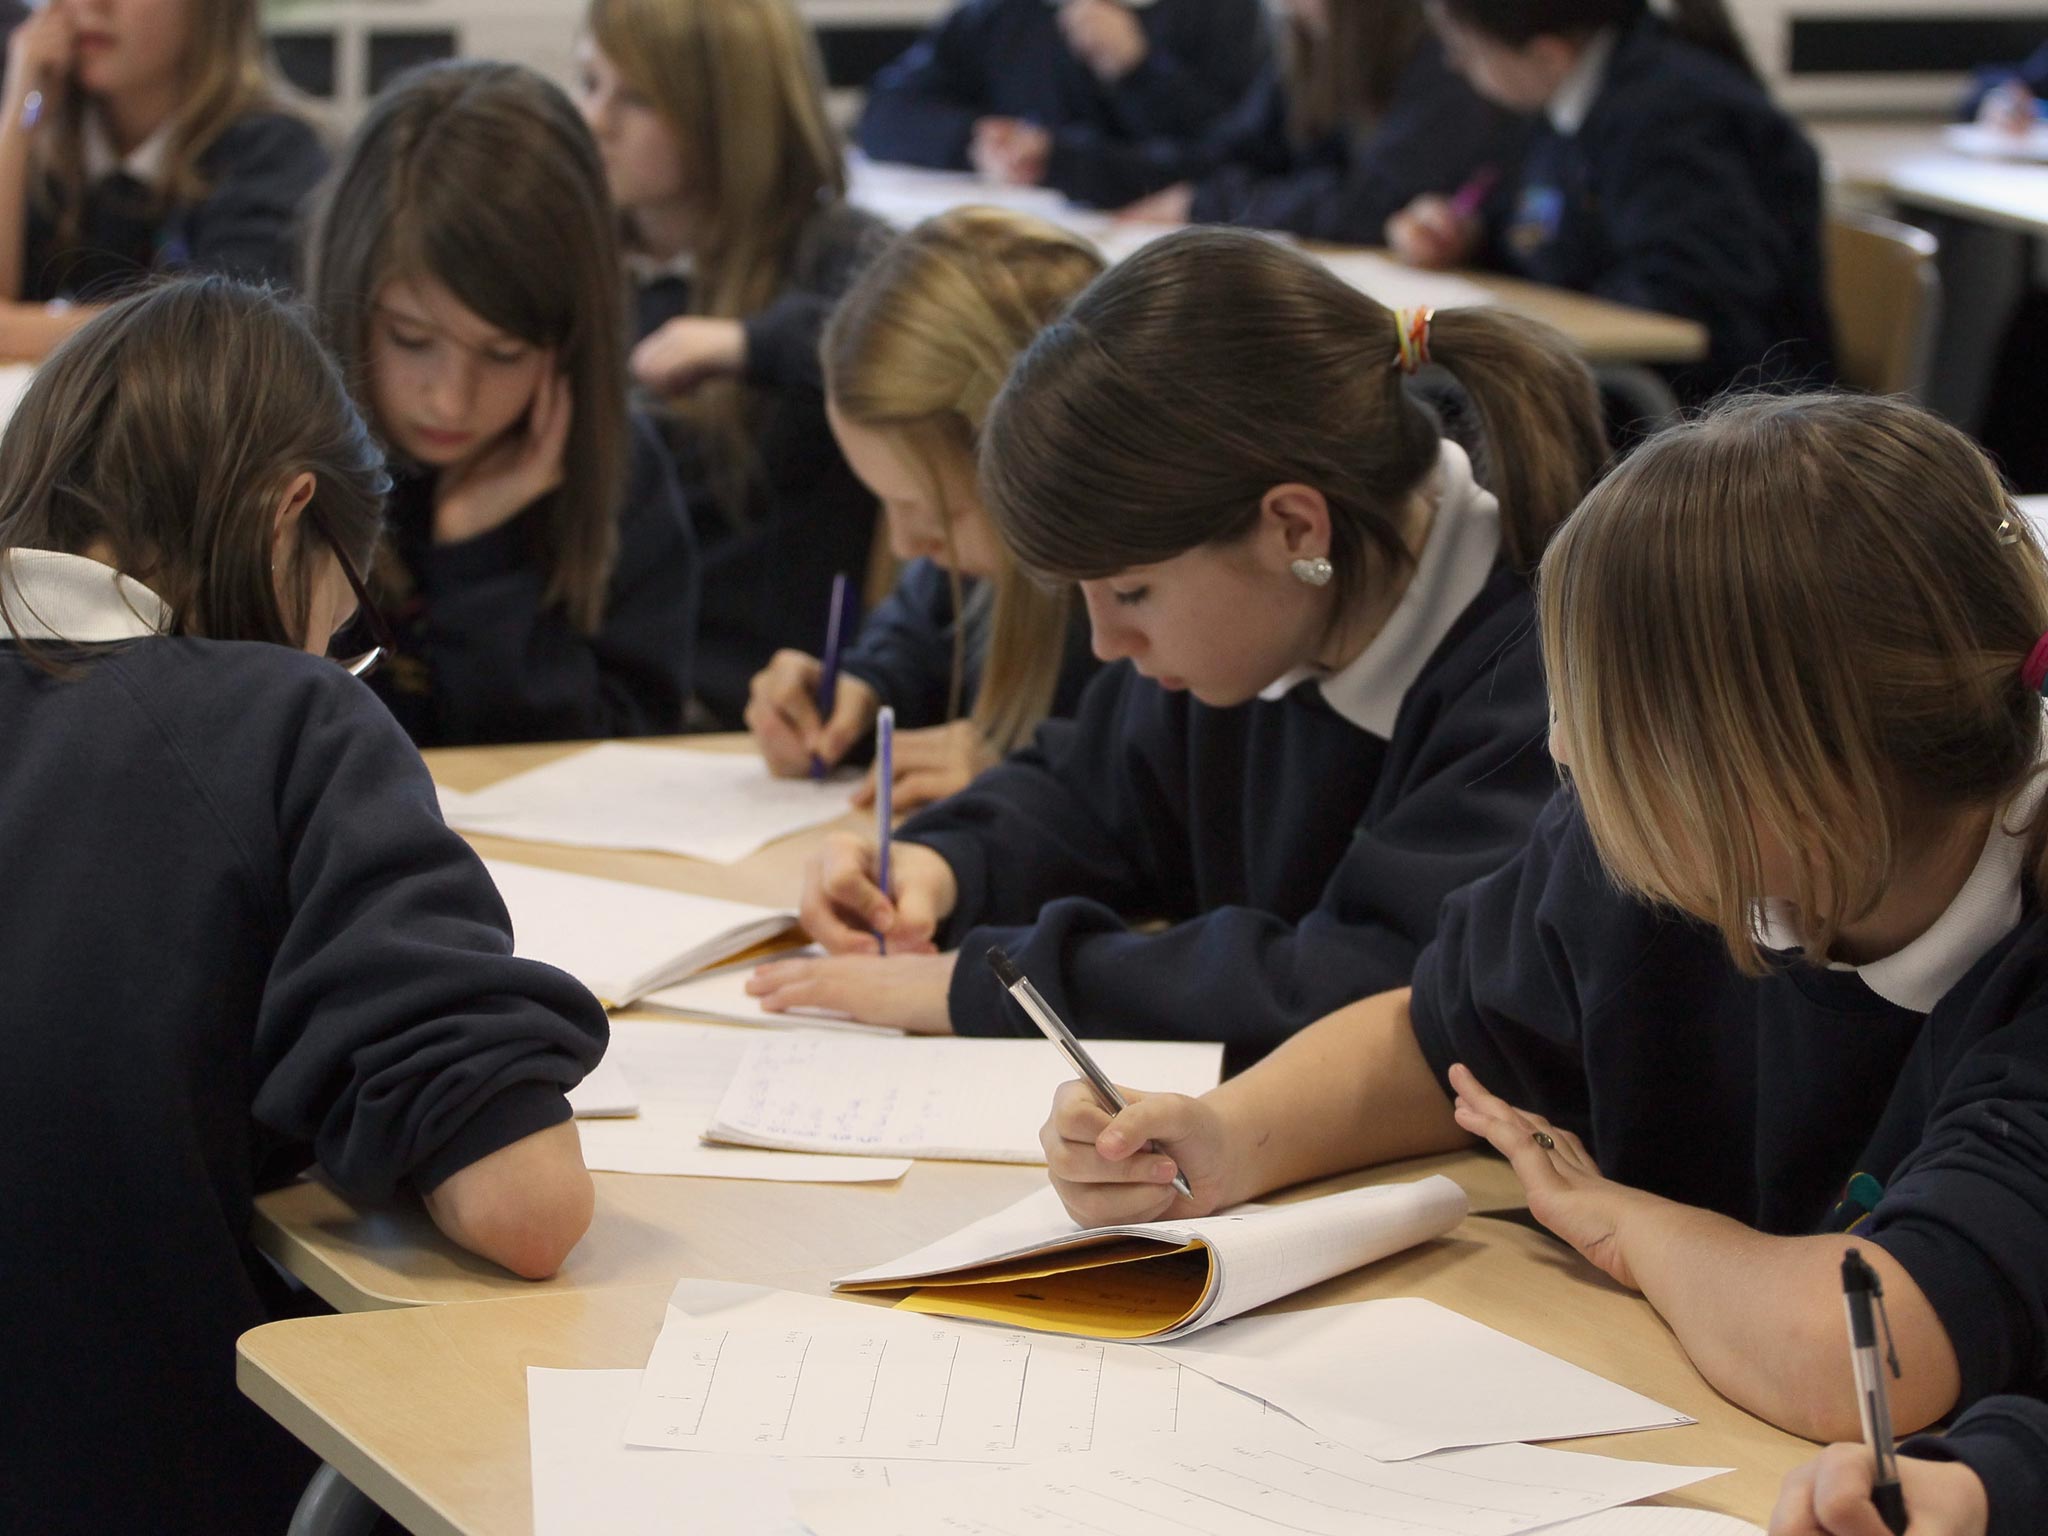 The Education Funding Agency is seeking to recover at least £162,000